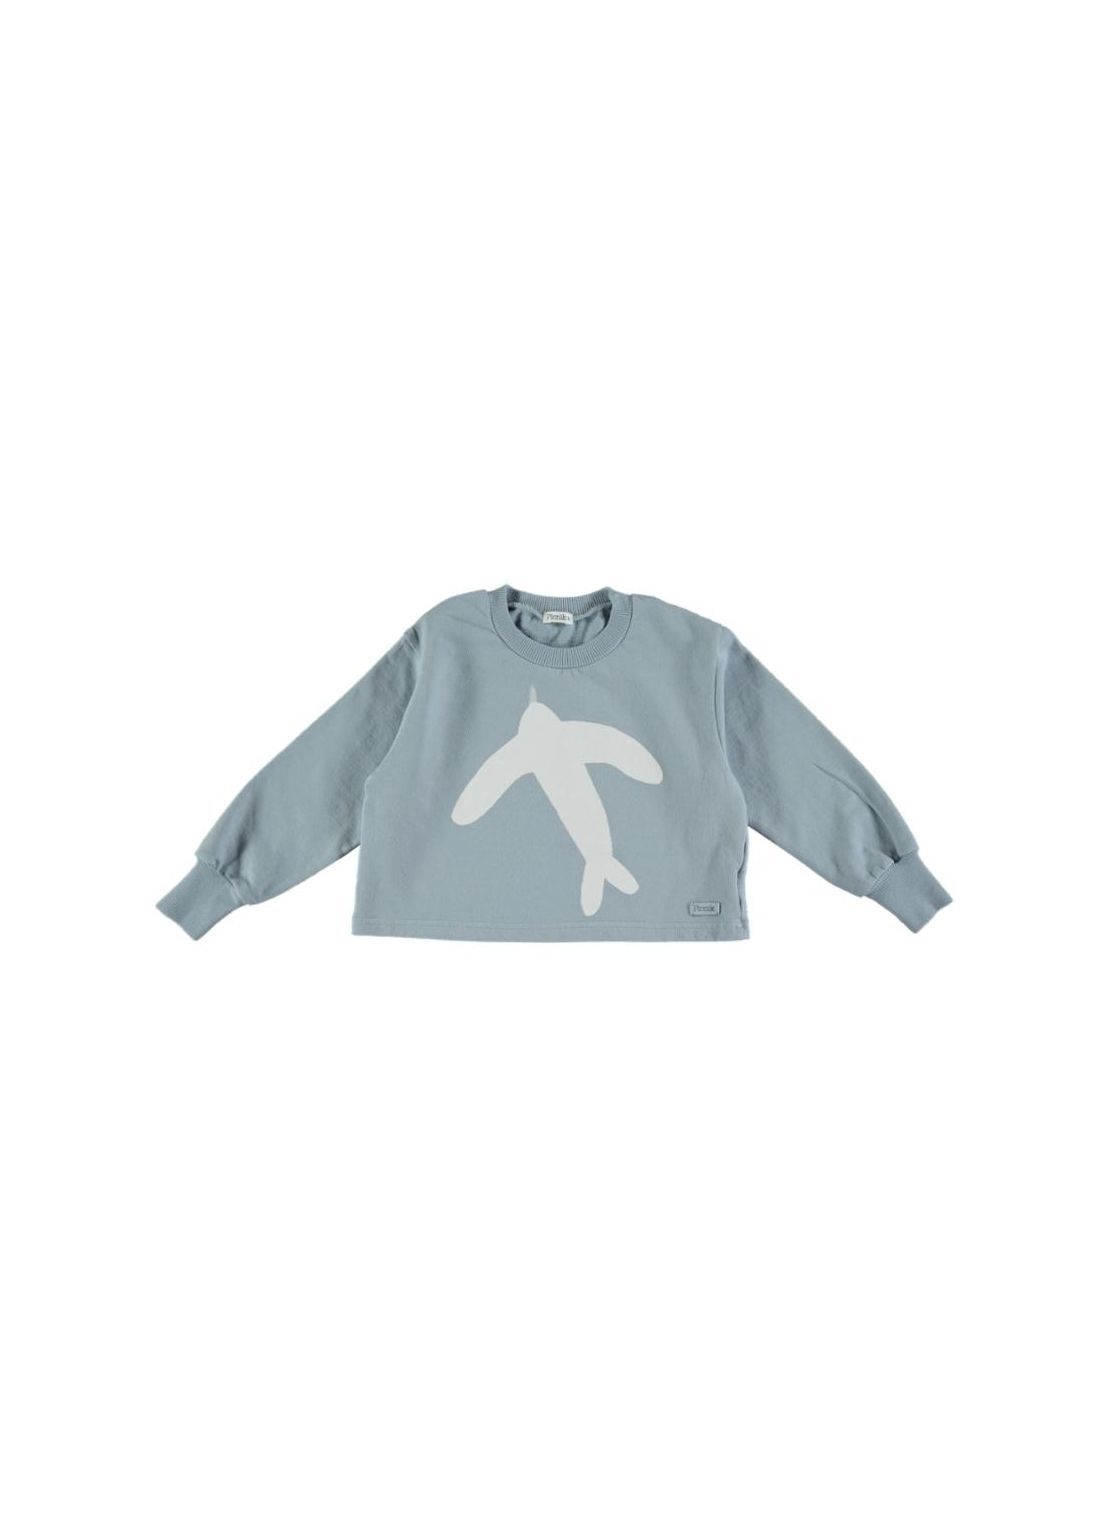 Kid SWEATER Unisex100% Cotton- Knitted